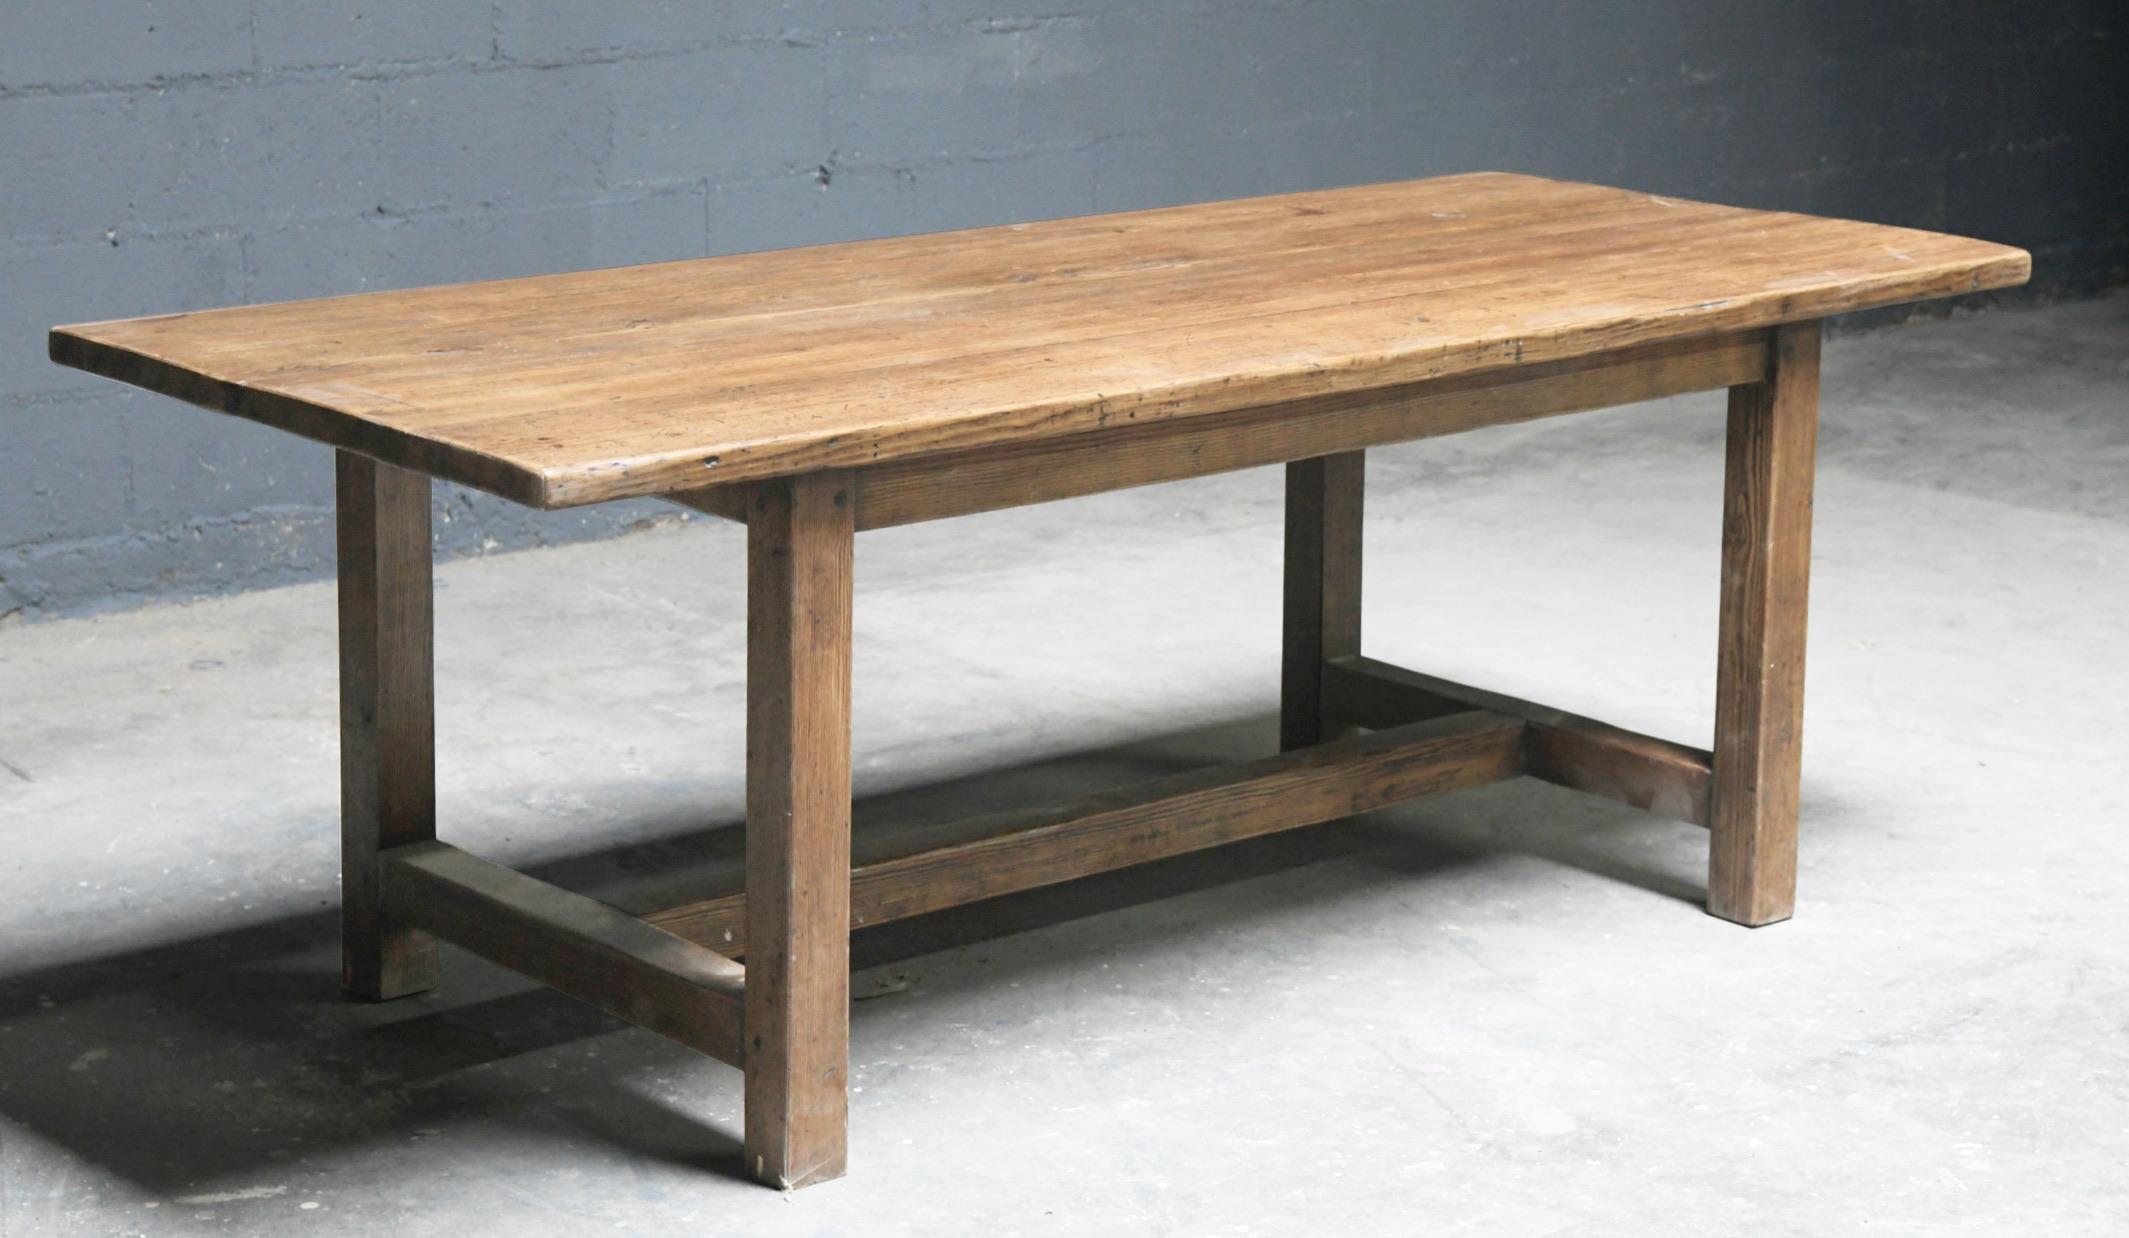 Hand-Crafted Farm Table in Reclaimed Pine, Made by Petersen Antiques